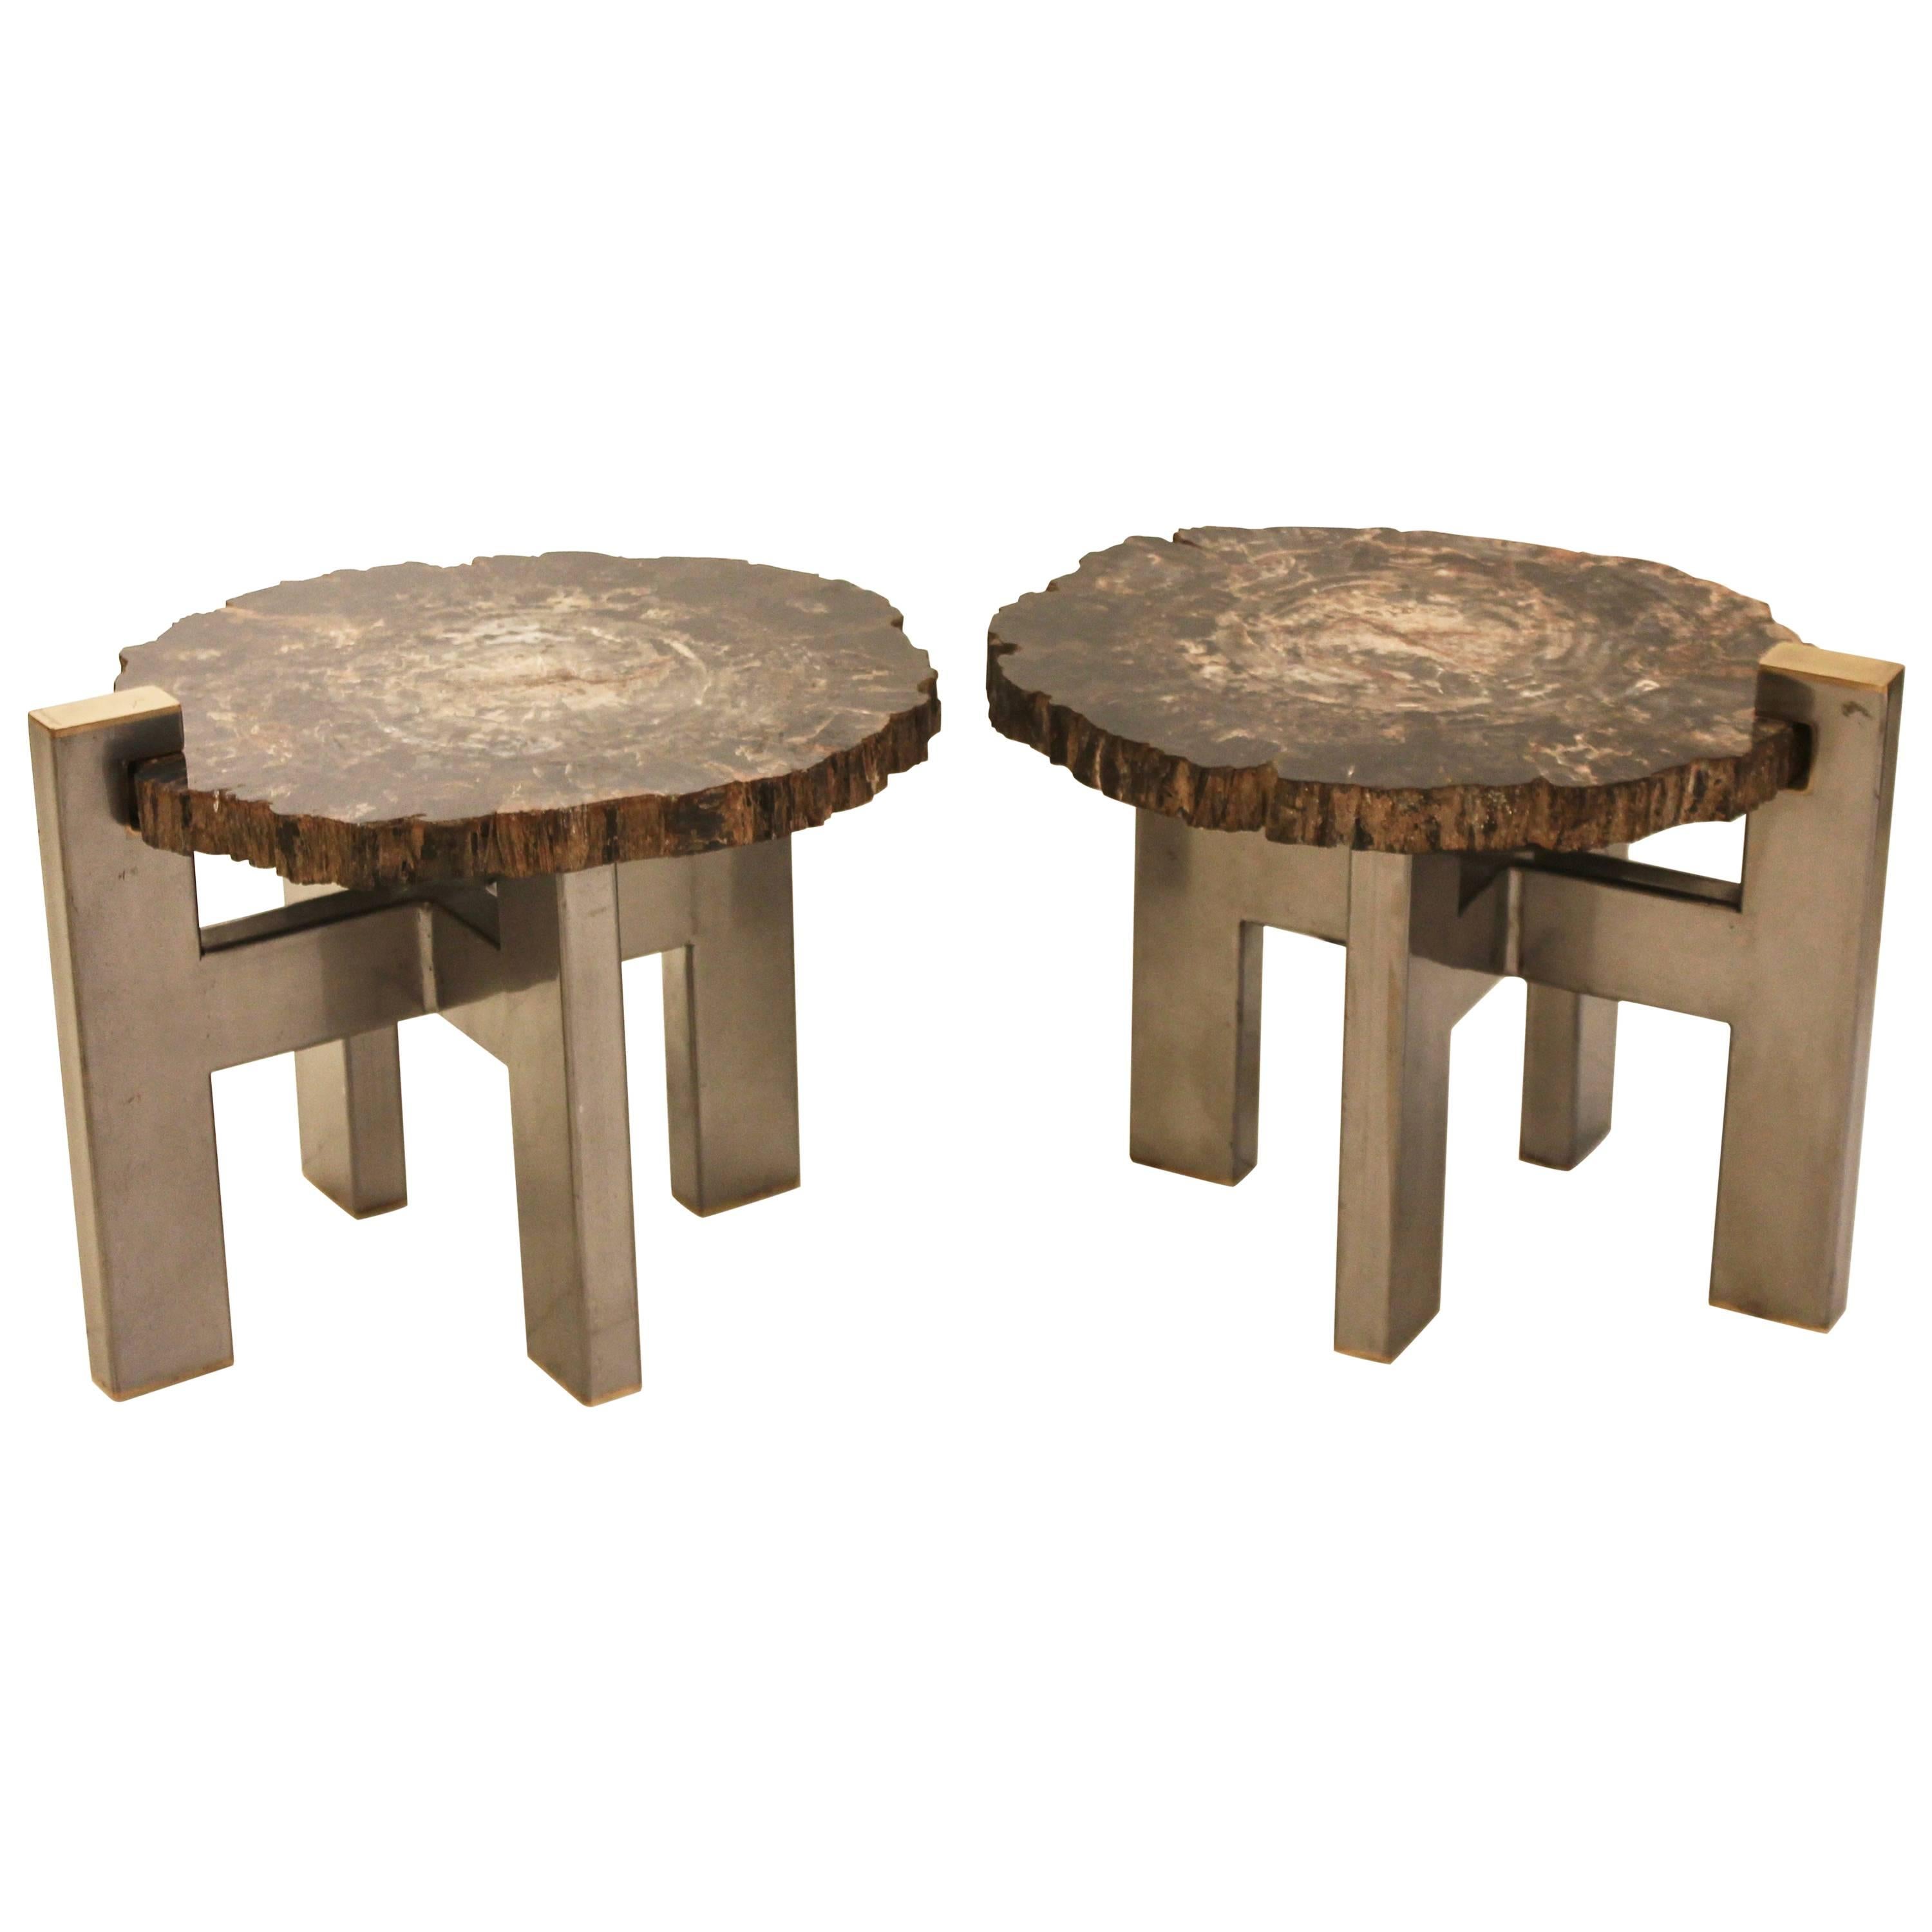 Pair of 1970s Inspired Side Tables in Petrified Wood by Artist Yann Dessauvages